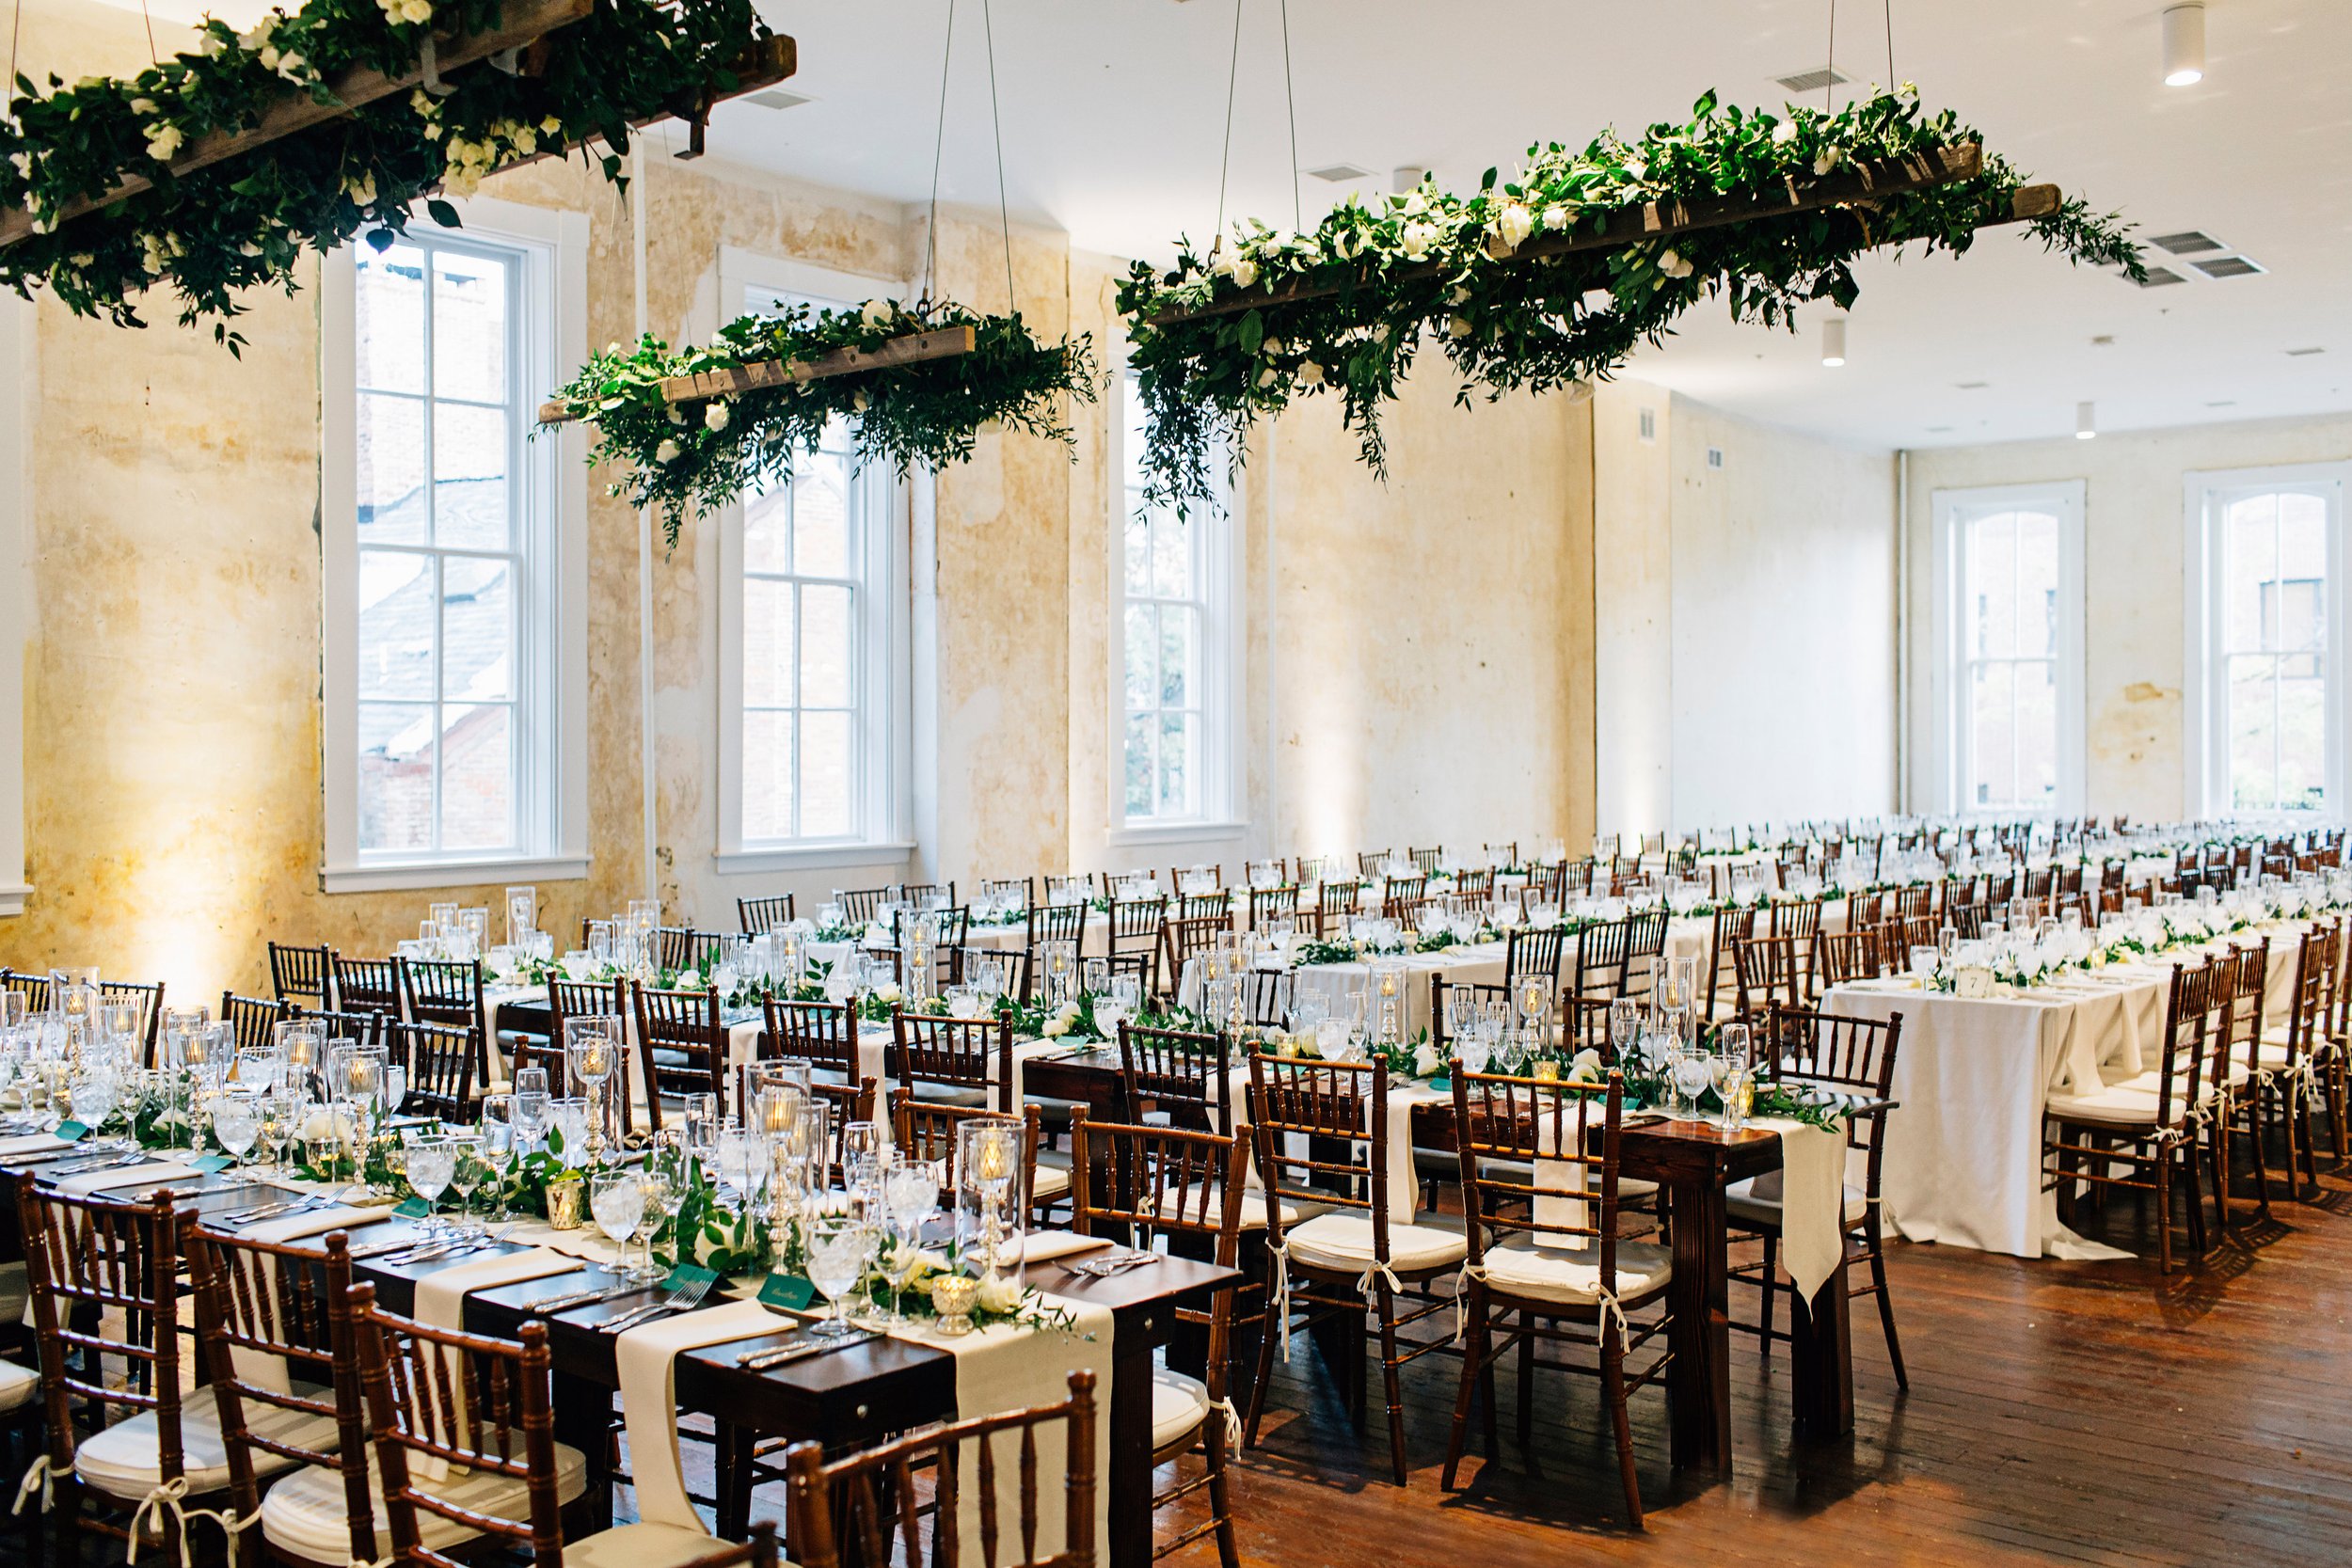 Empire Room wedding dinner set up with hanging greenery